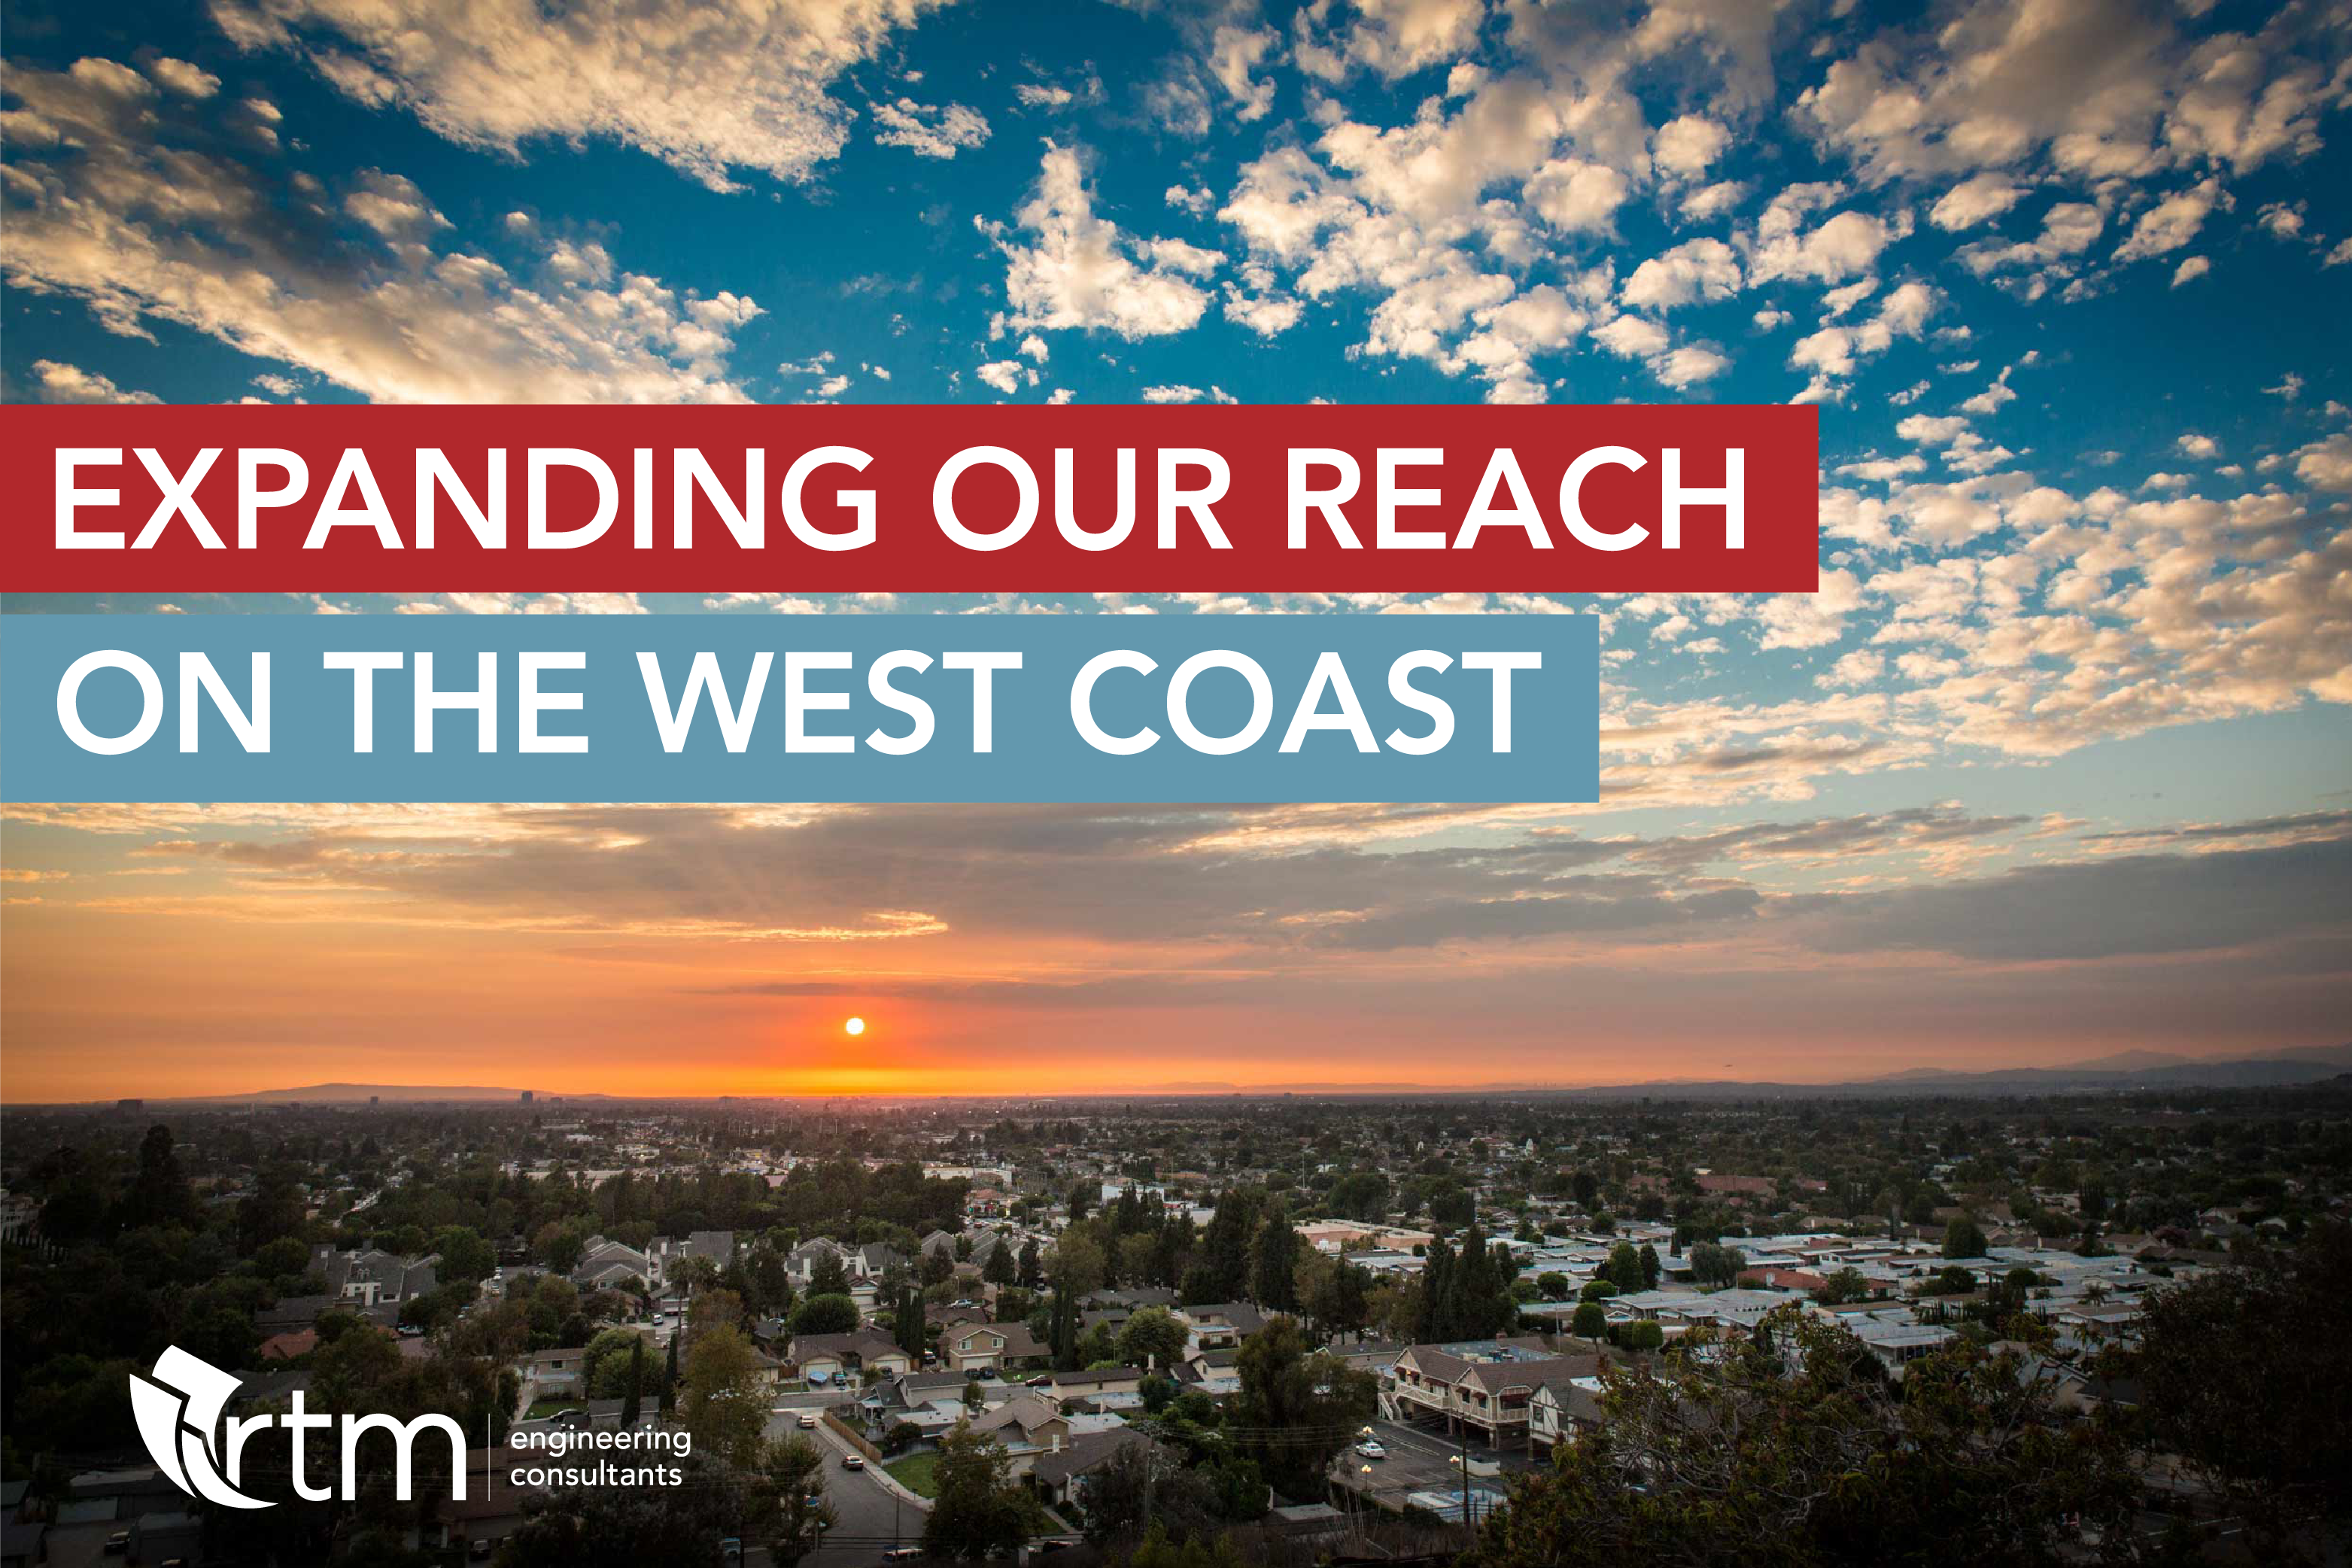 Expanding our reach on the West Coast